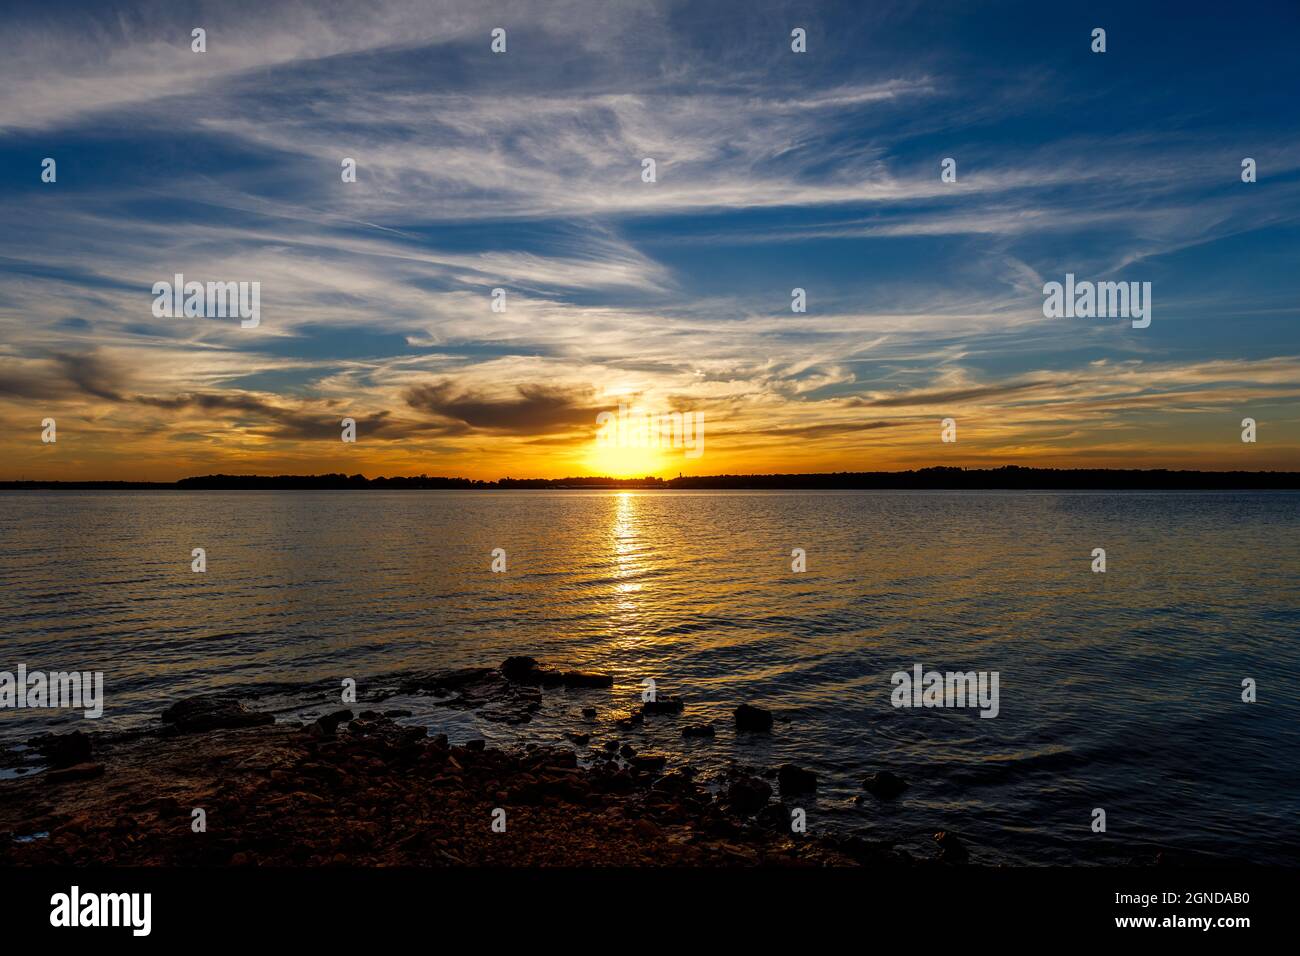 Beautiful sunset over a lake in Oklahoma. Stock Photo